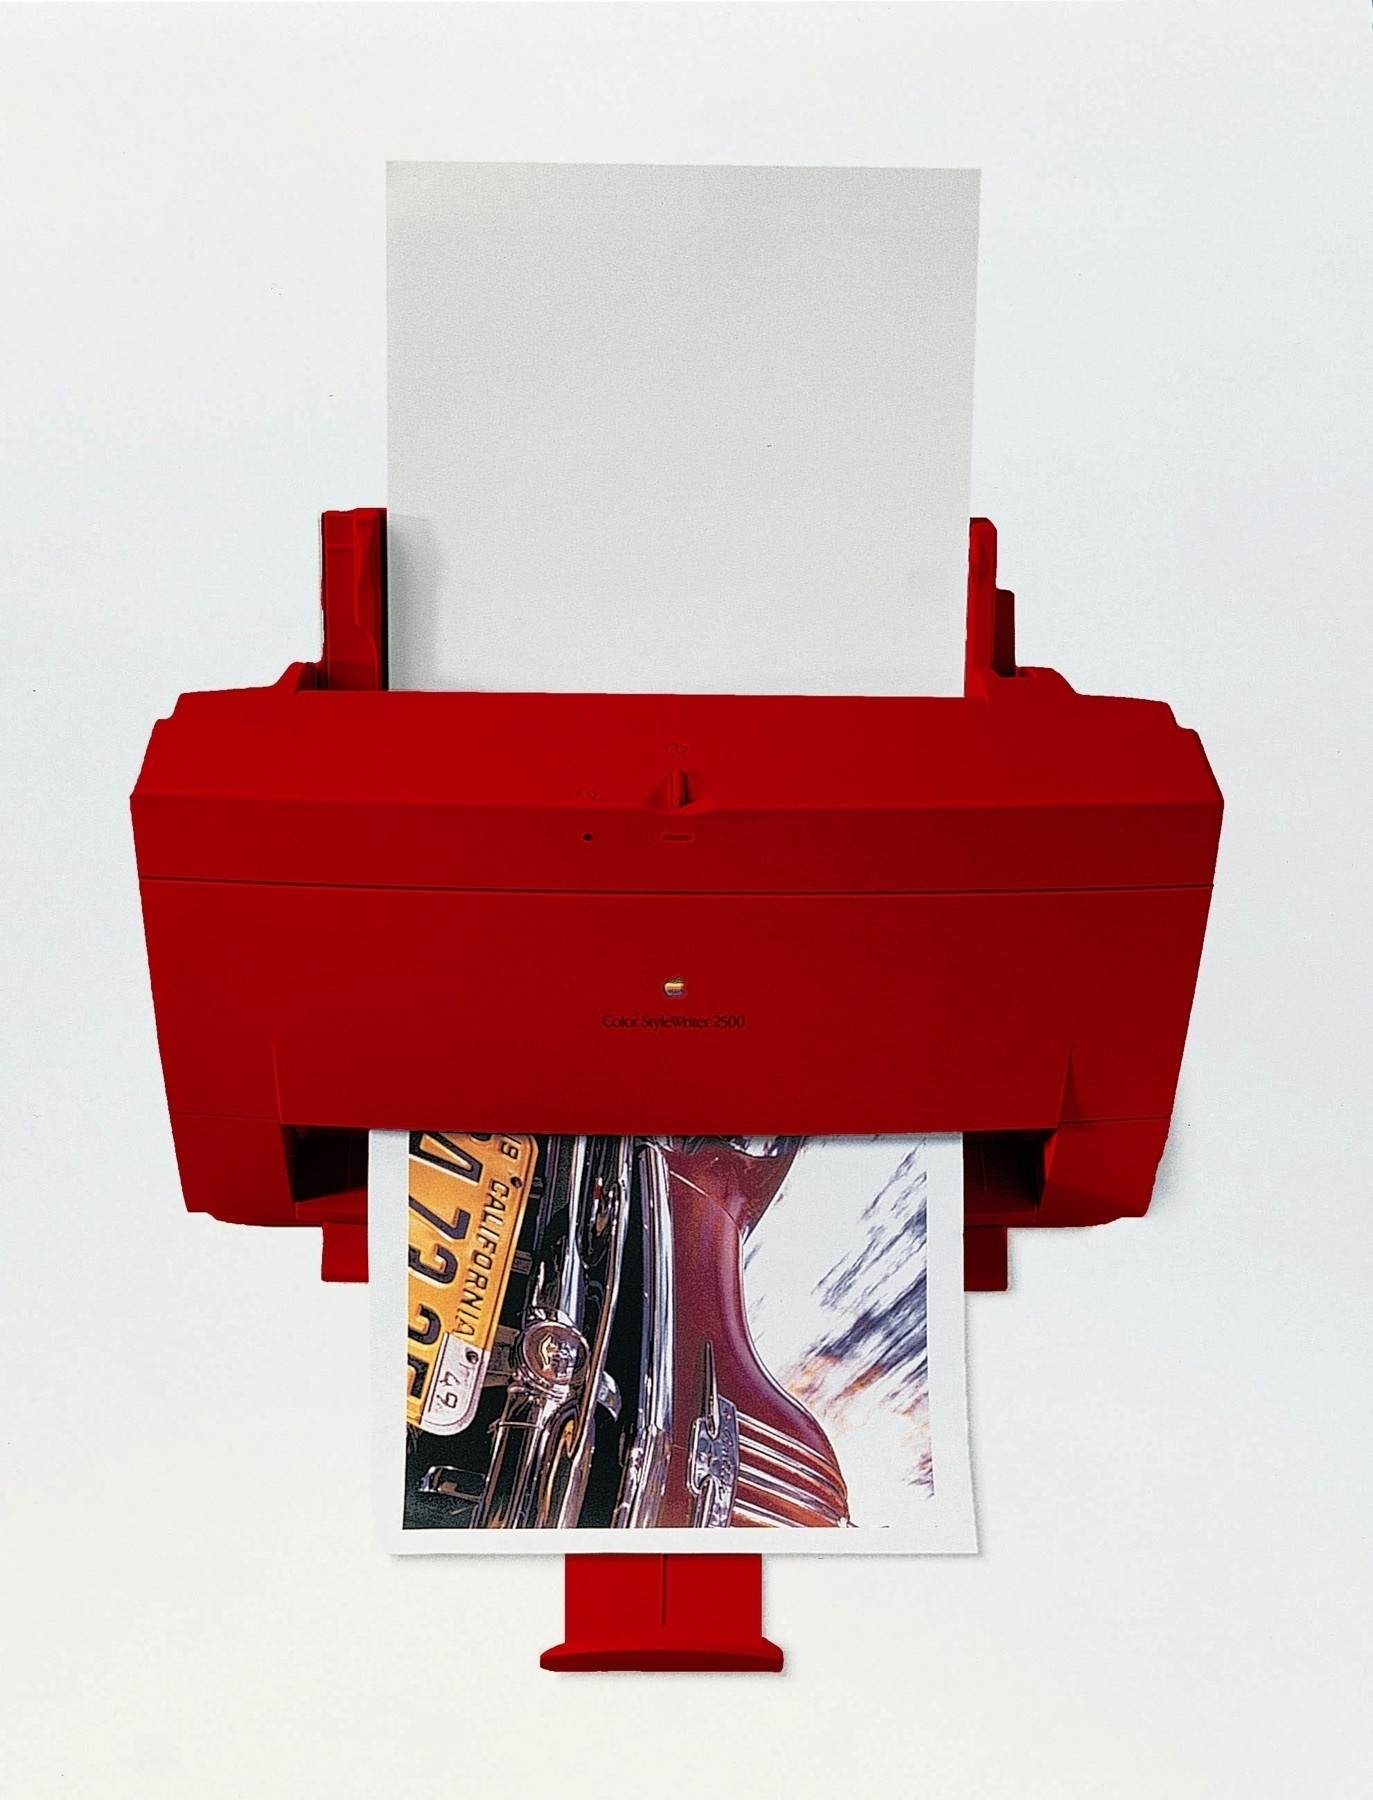 StyleWriter 2500 (PRODUCT)RED